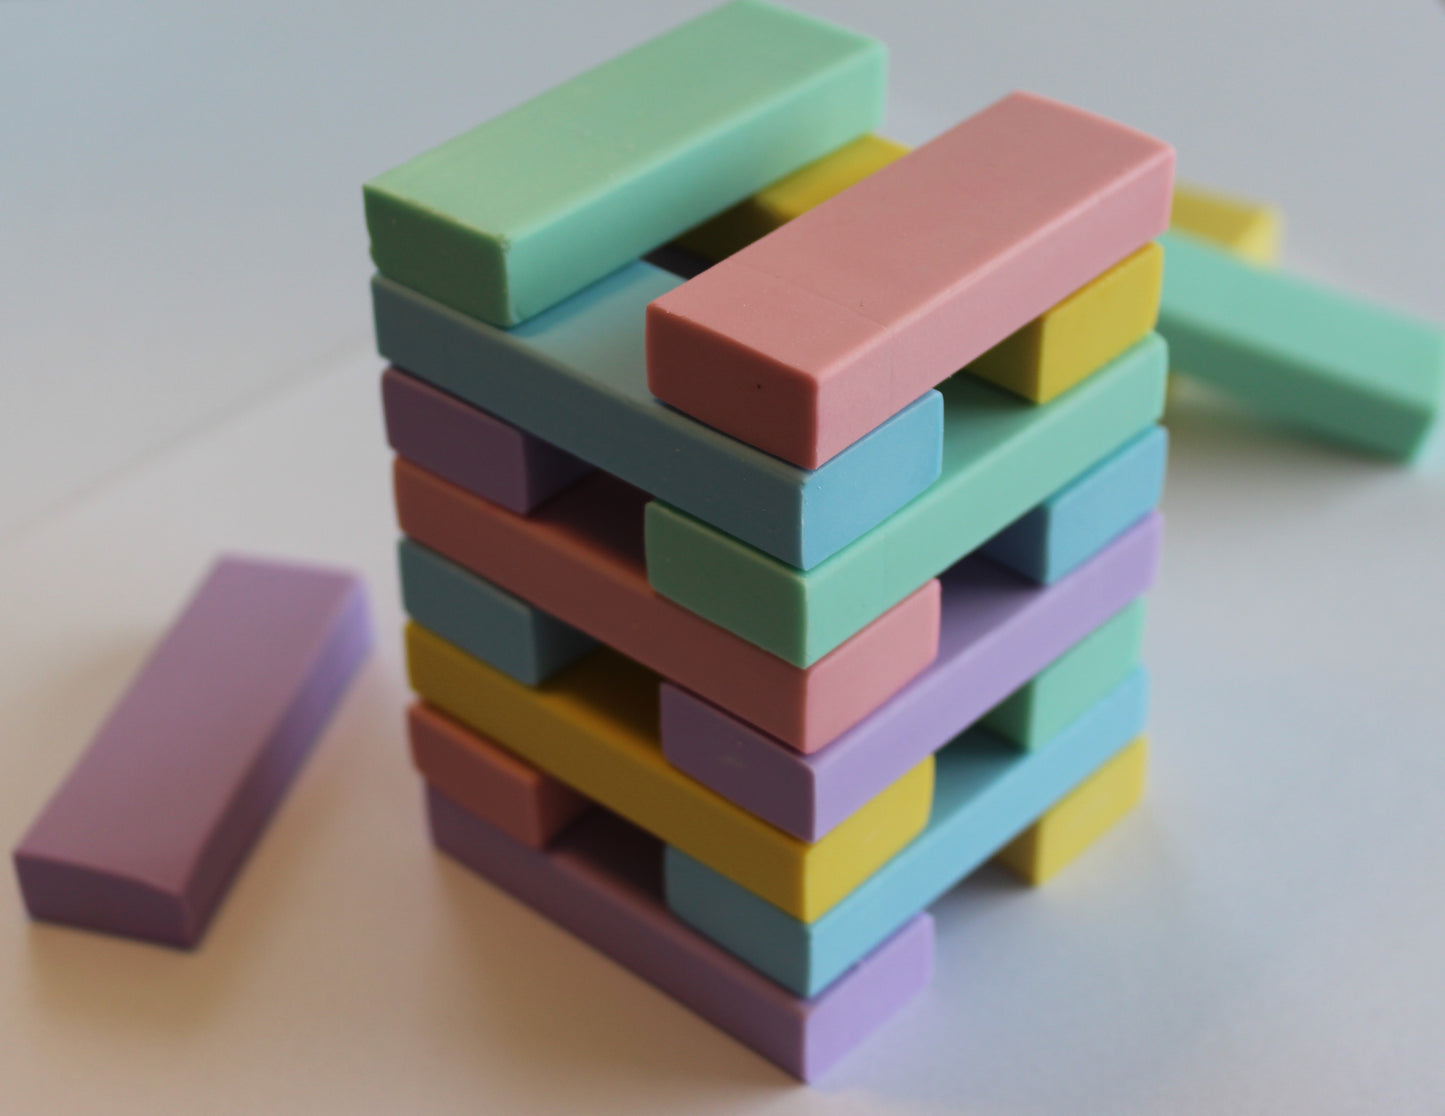 pastel green, blue, pink yellow and purple rubbers in a jenga design